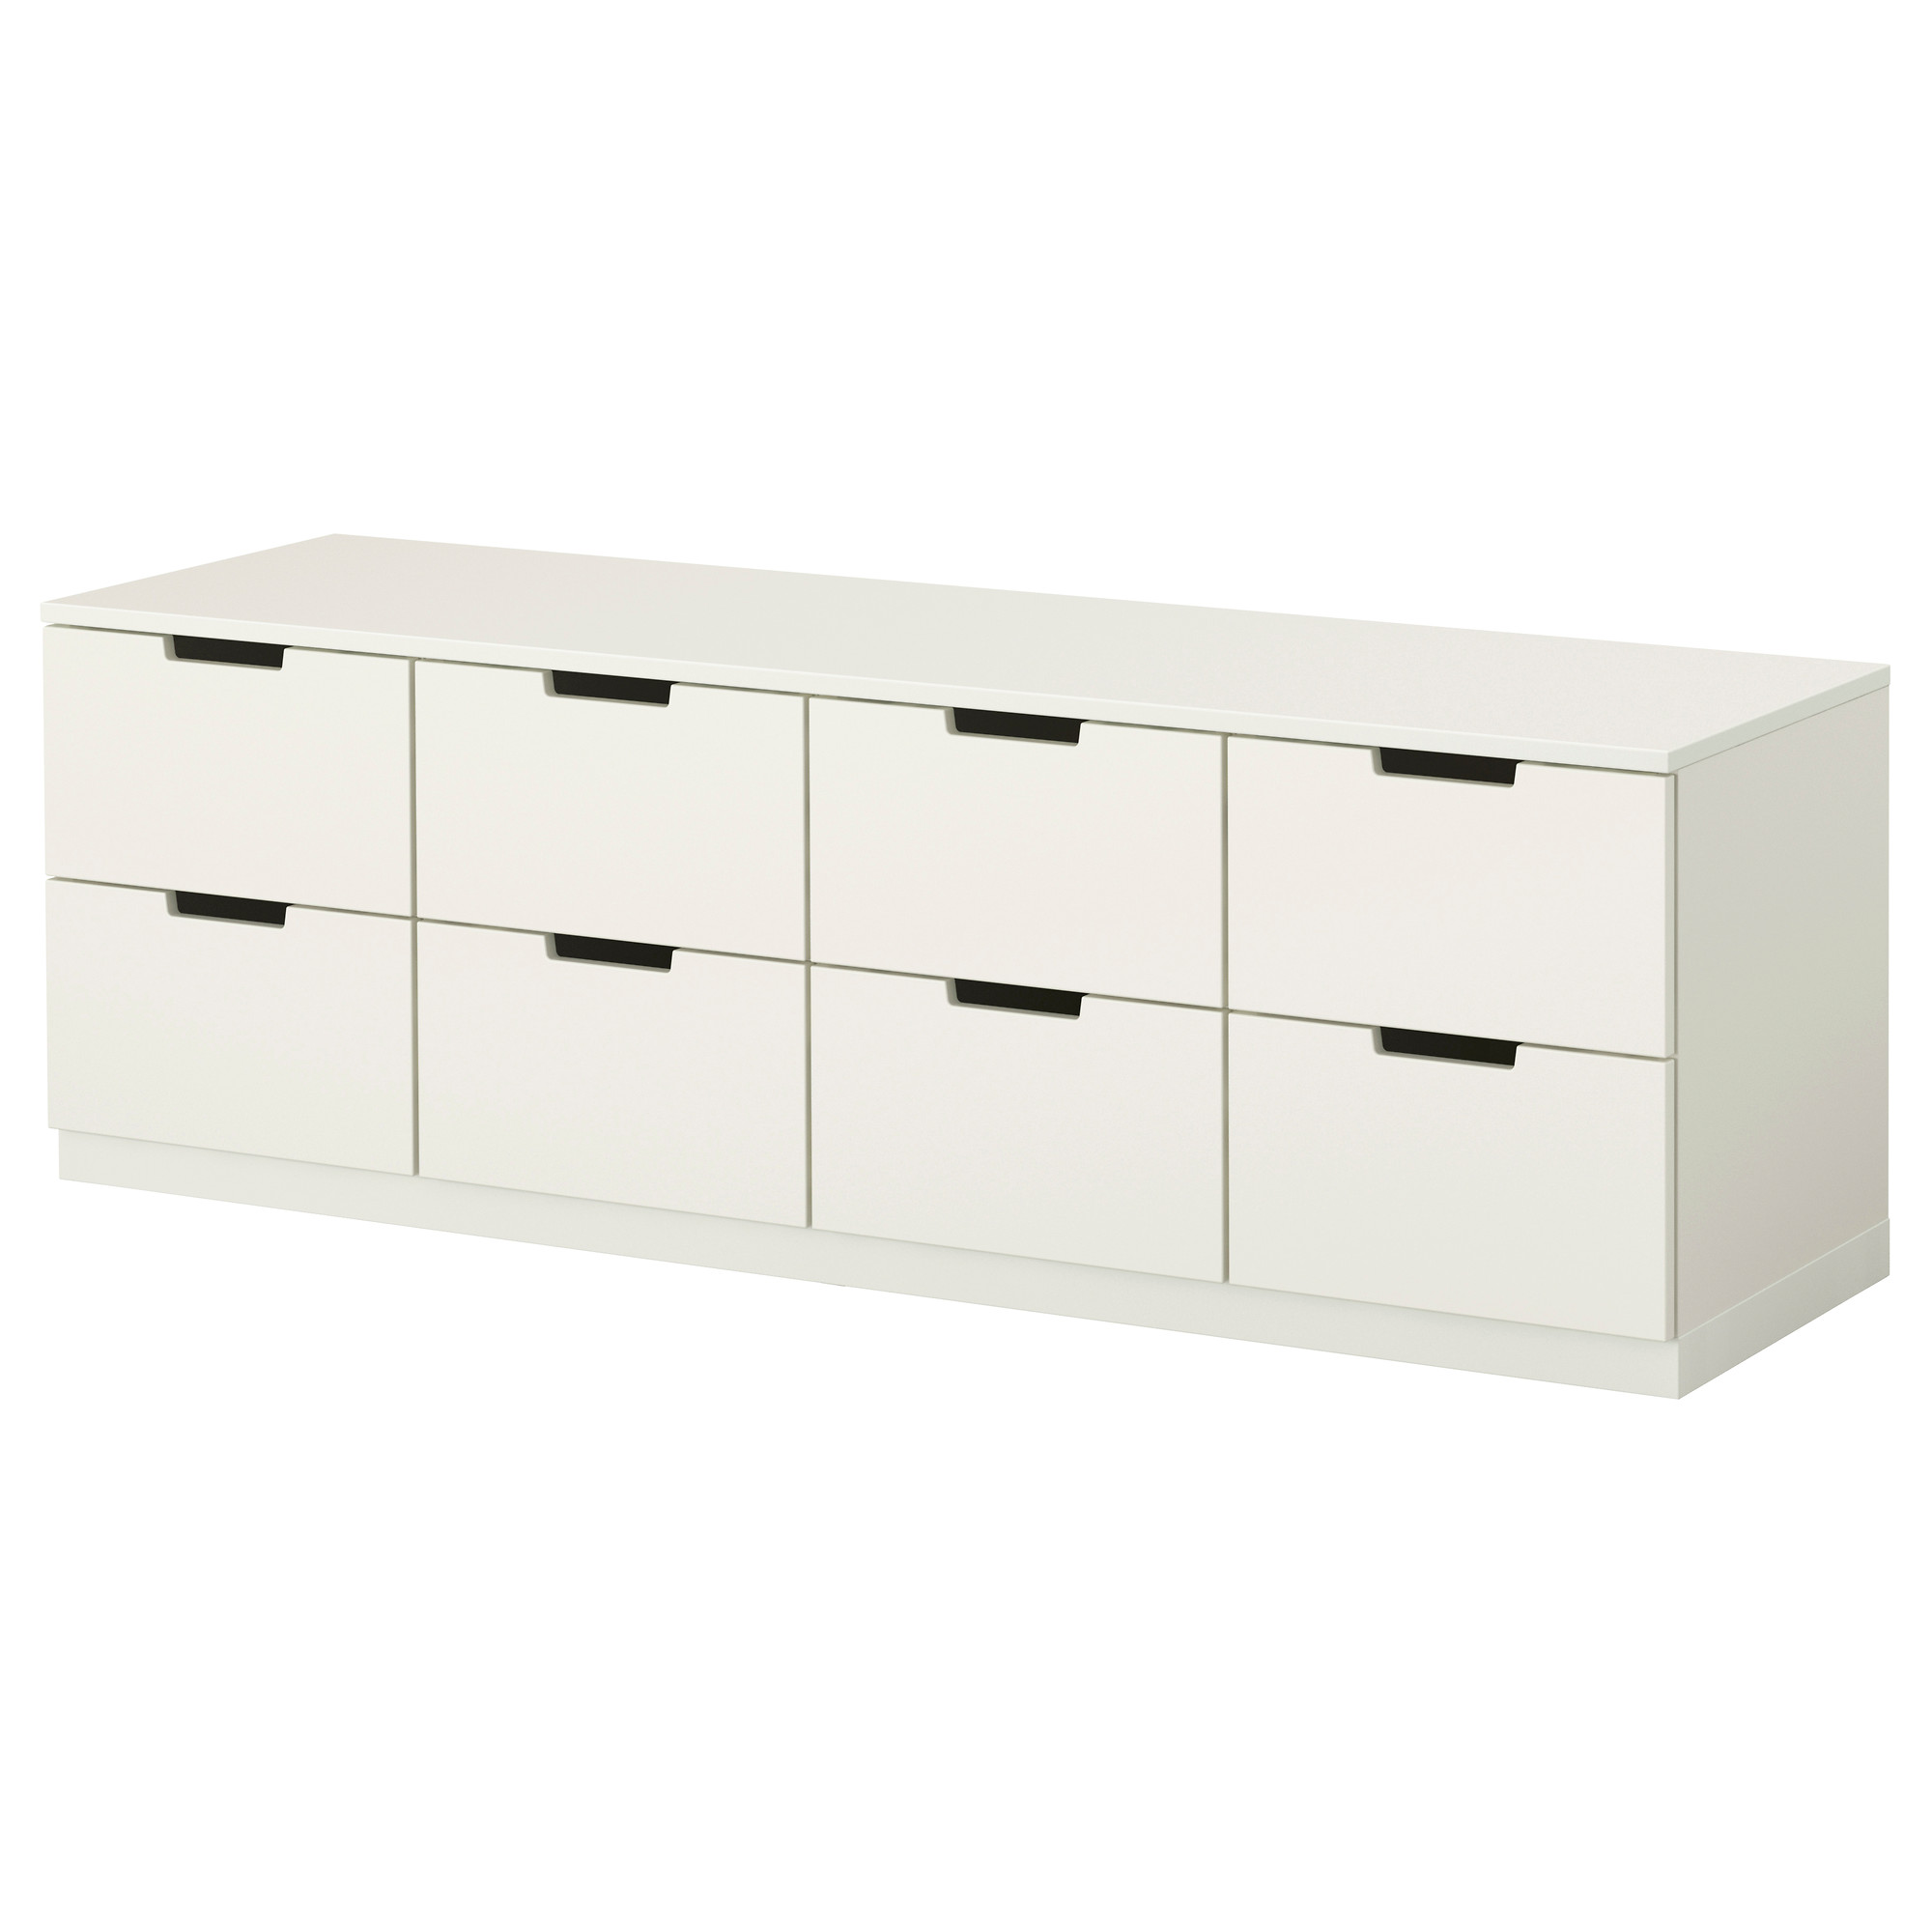 A white IKEA Nordli dresser has 8 drawers you can use for clothes storage, vinyl record storage, and more.